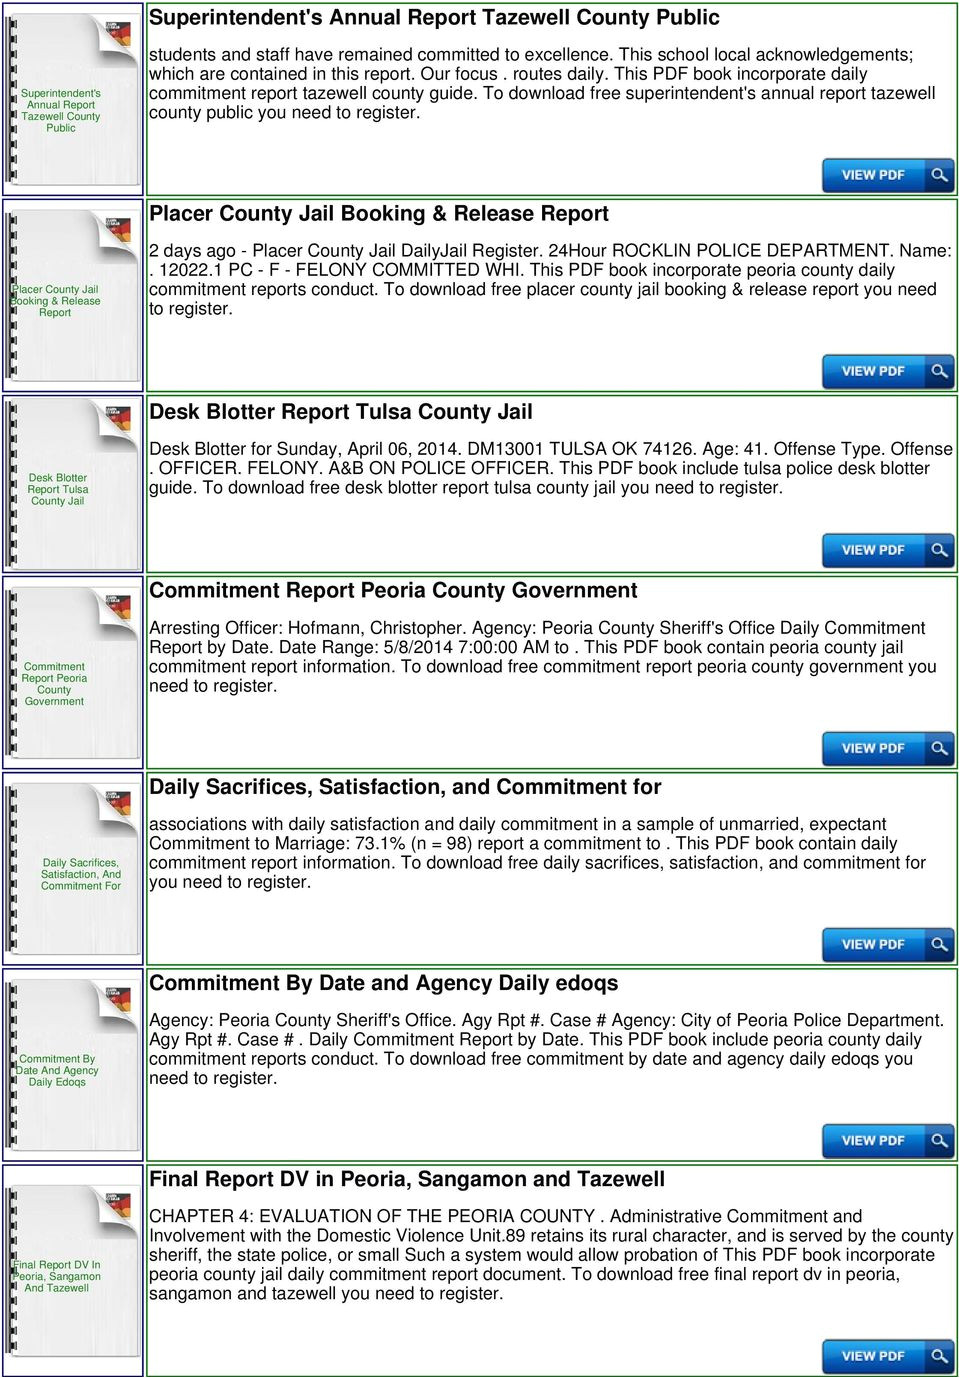 array tazewell county jail daily commitment report pdf rh docplayer net